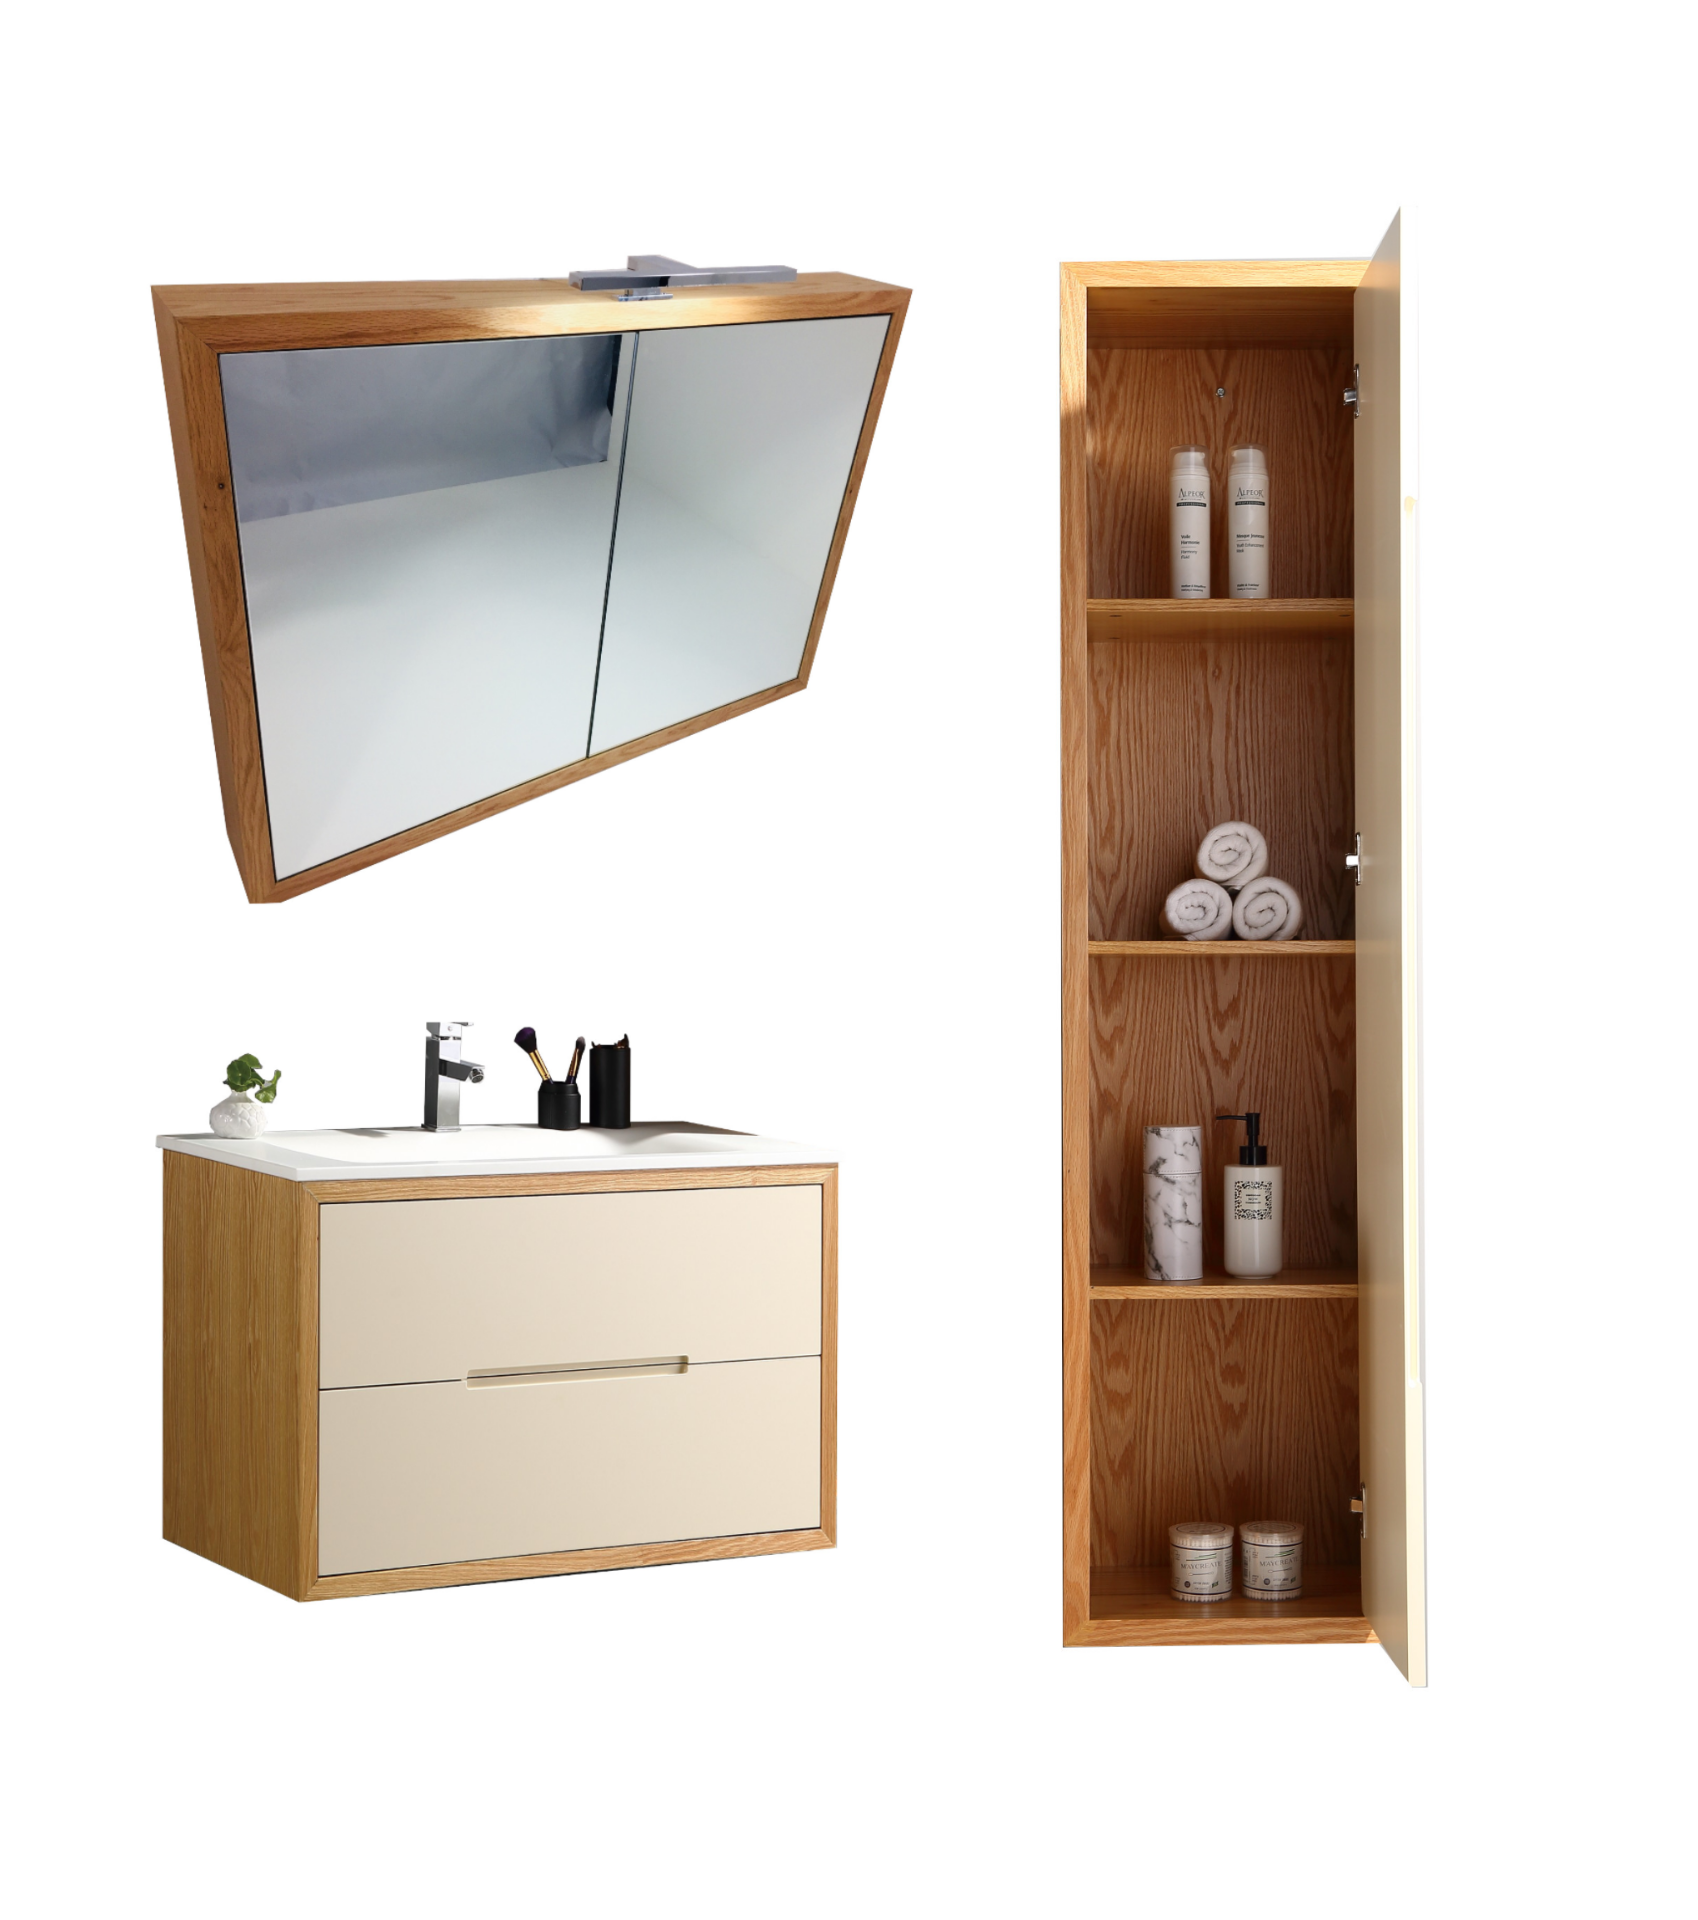 BRAND NEW 5 Sets of Complete Vanity Sets in Beige with fixtures and fittings RRP £3999.99 *NO VAT* - Image 4 of 5